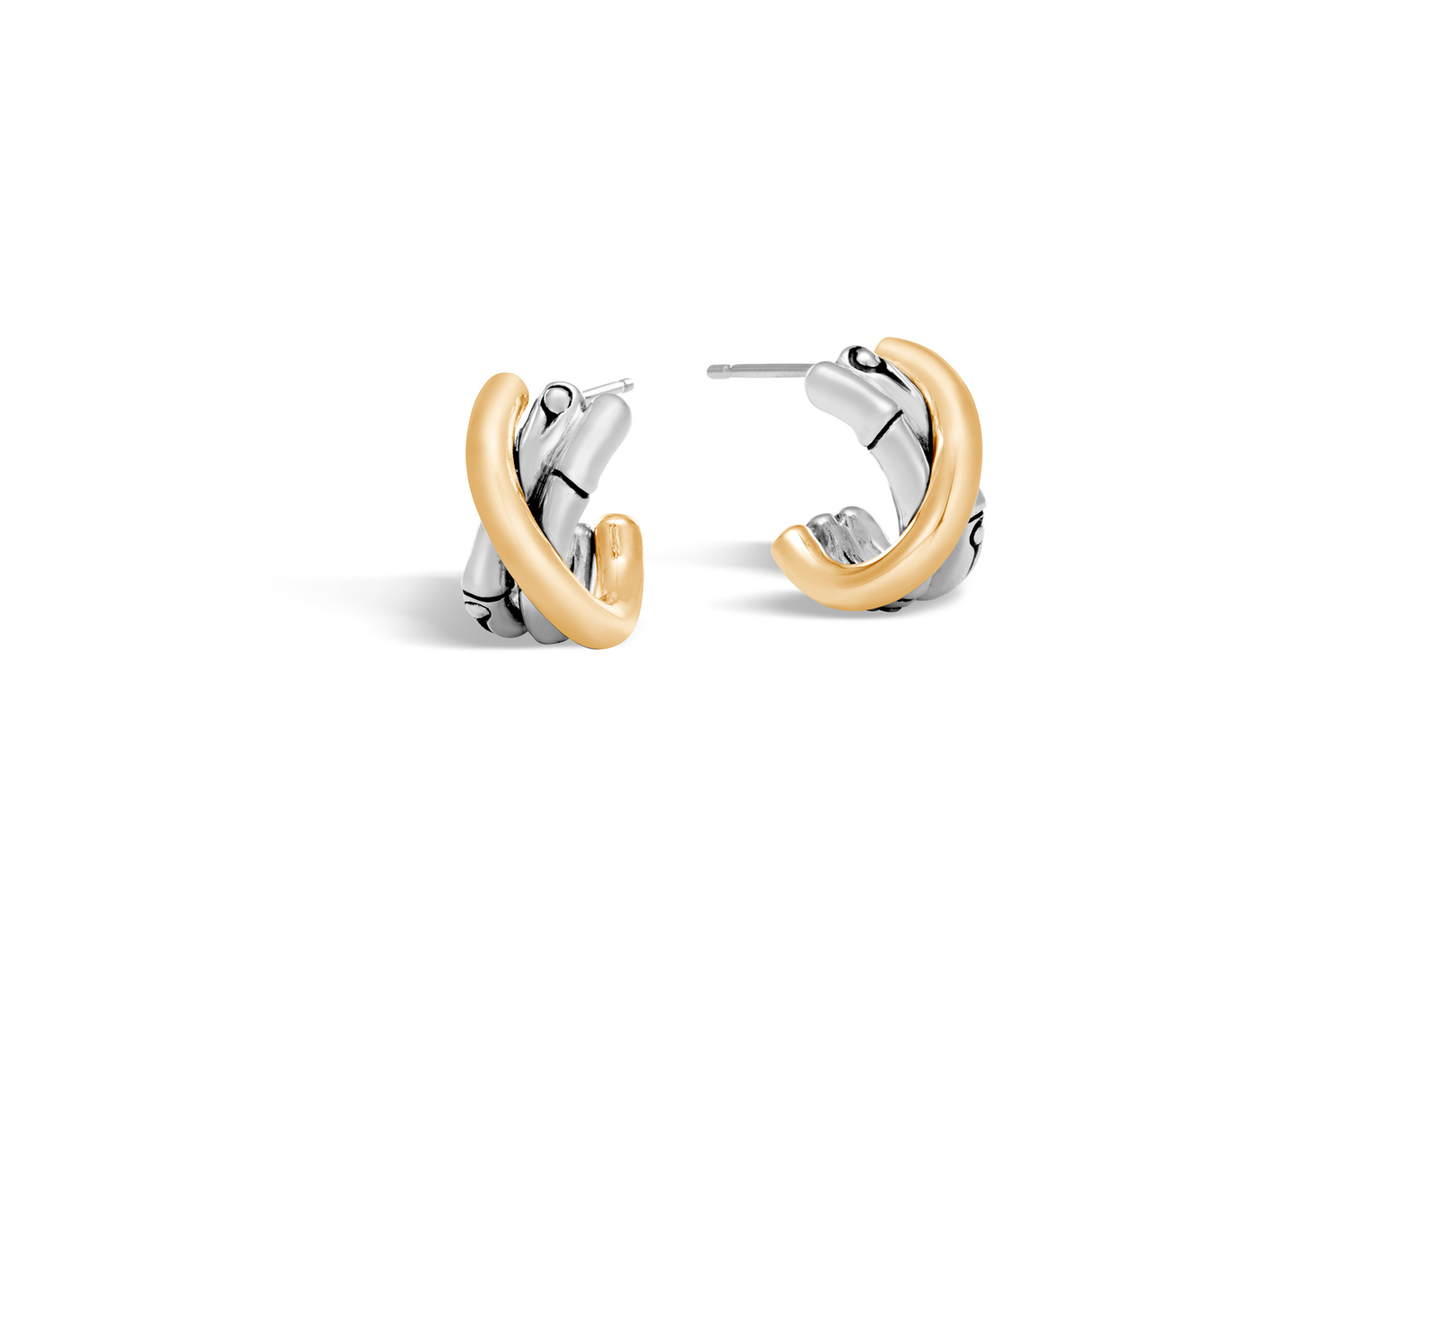 John Hardy Bamboo Sterling Silver and Yellow Gold Small J Hoop Earrings